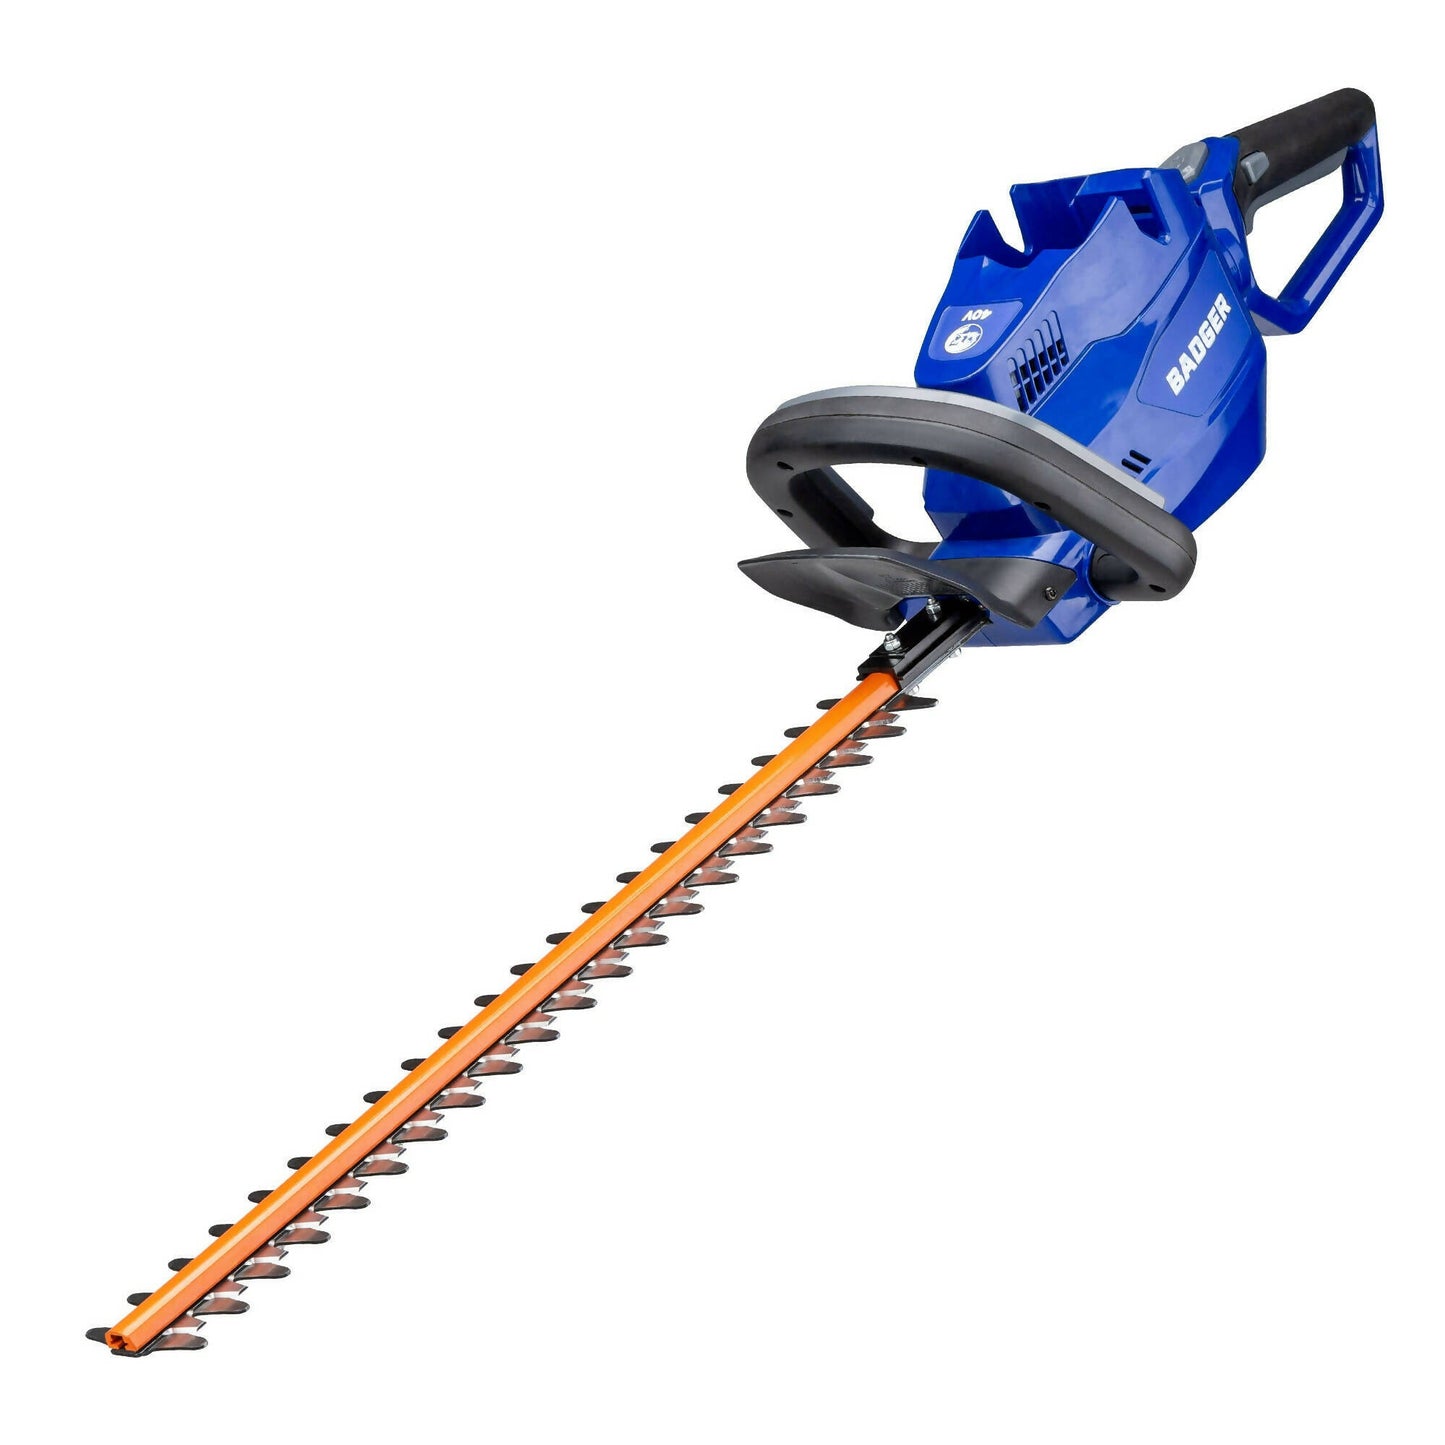 Wild Badger Power Cordless 40 Volt 24-inch Brushed Hedge Trimmer, Includes 2.0 Ah Battery and Clip-on Charger